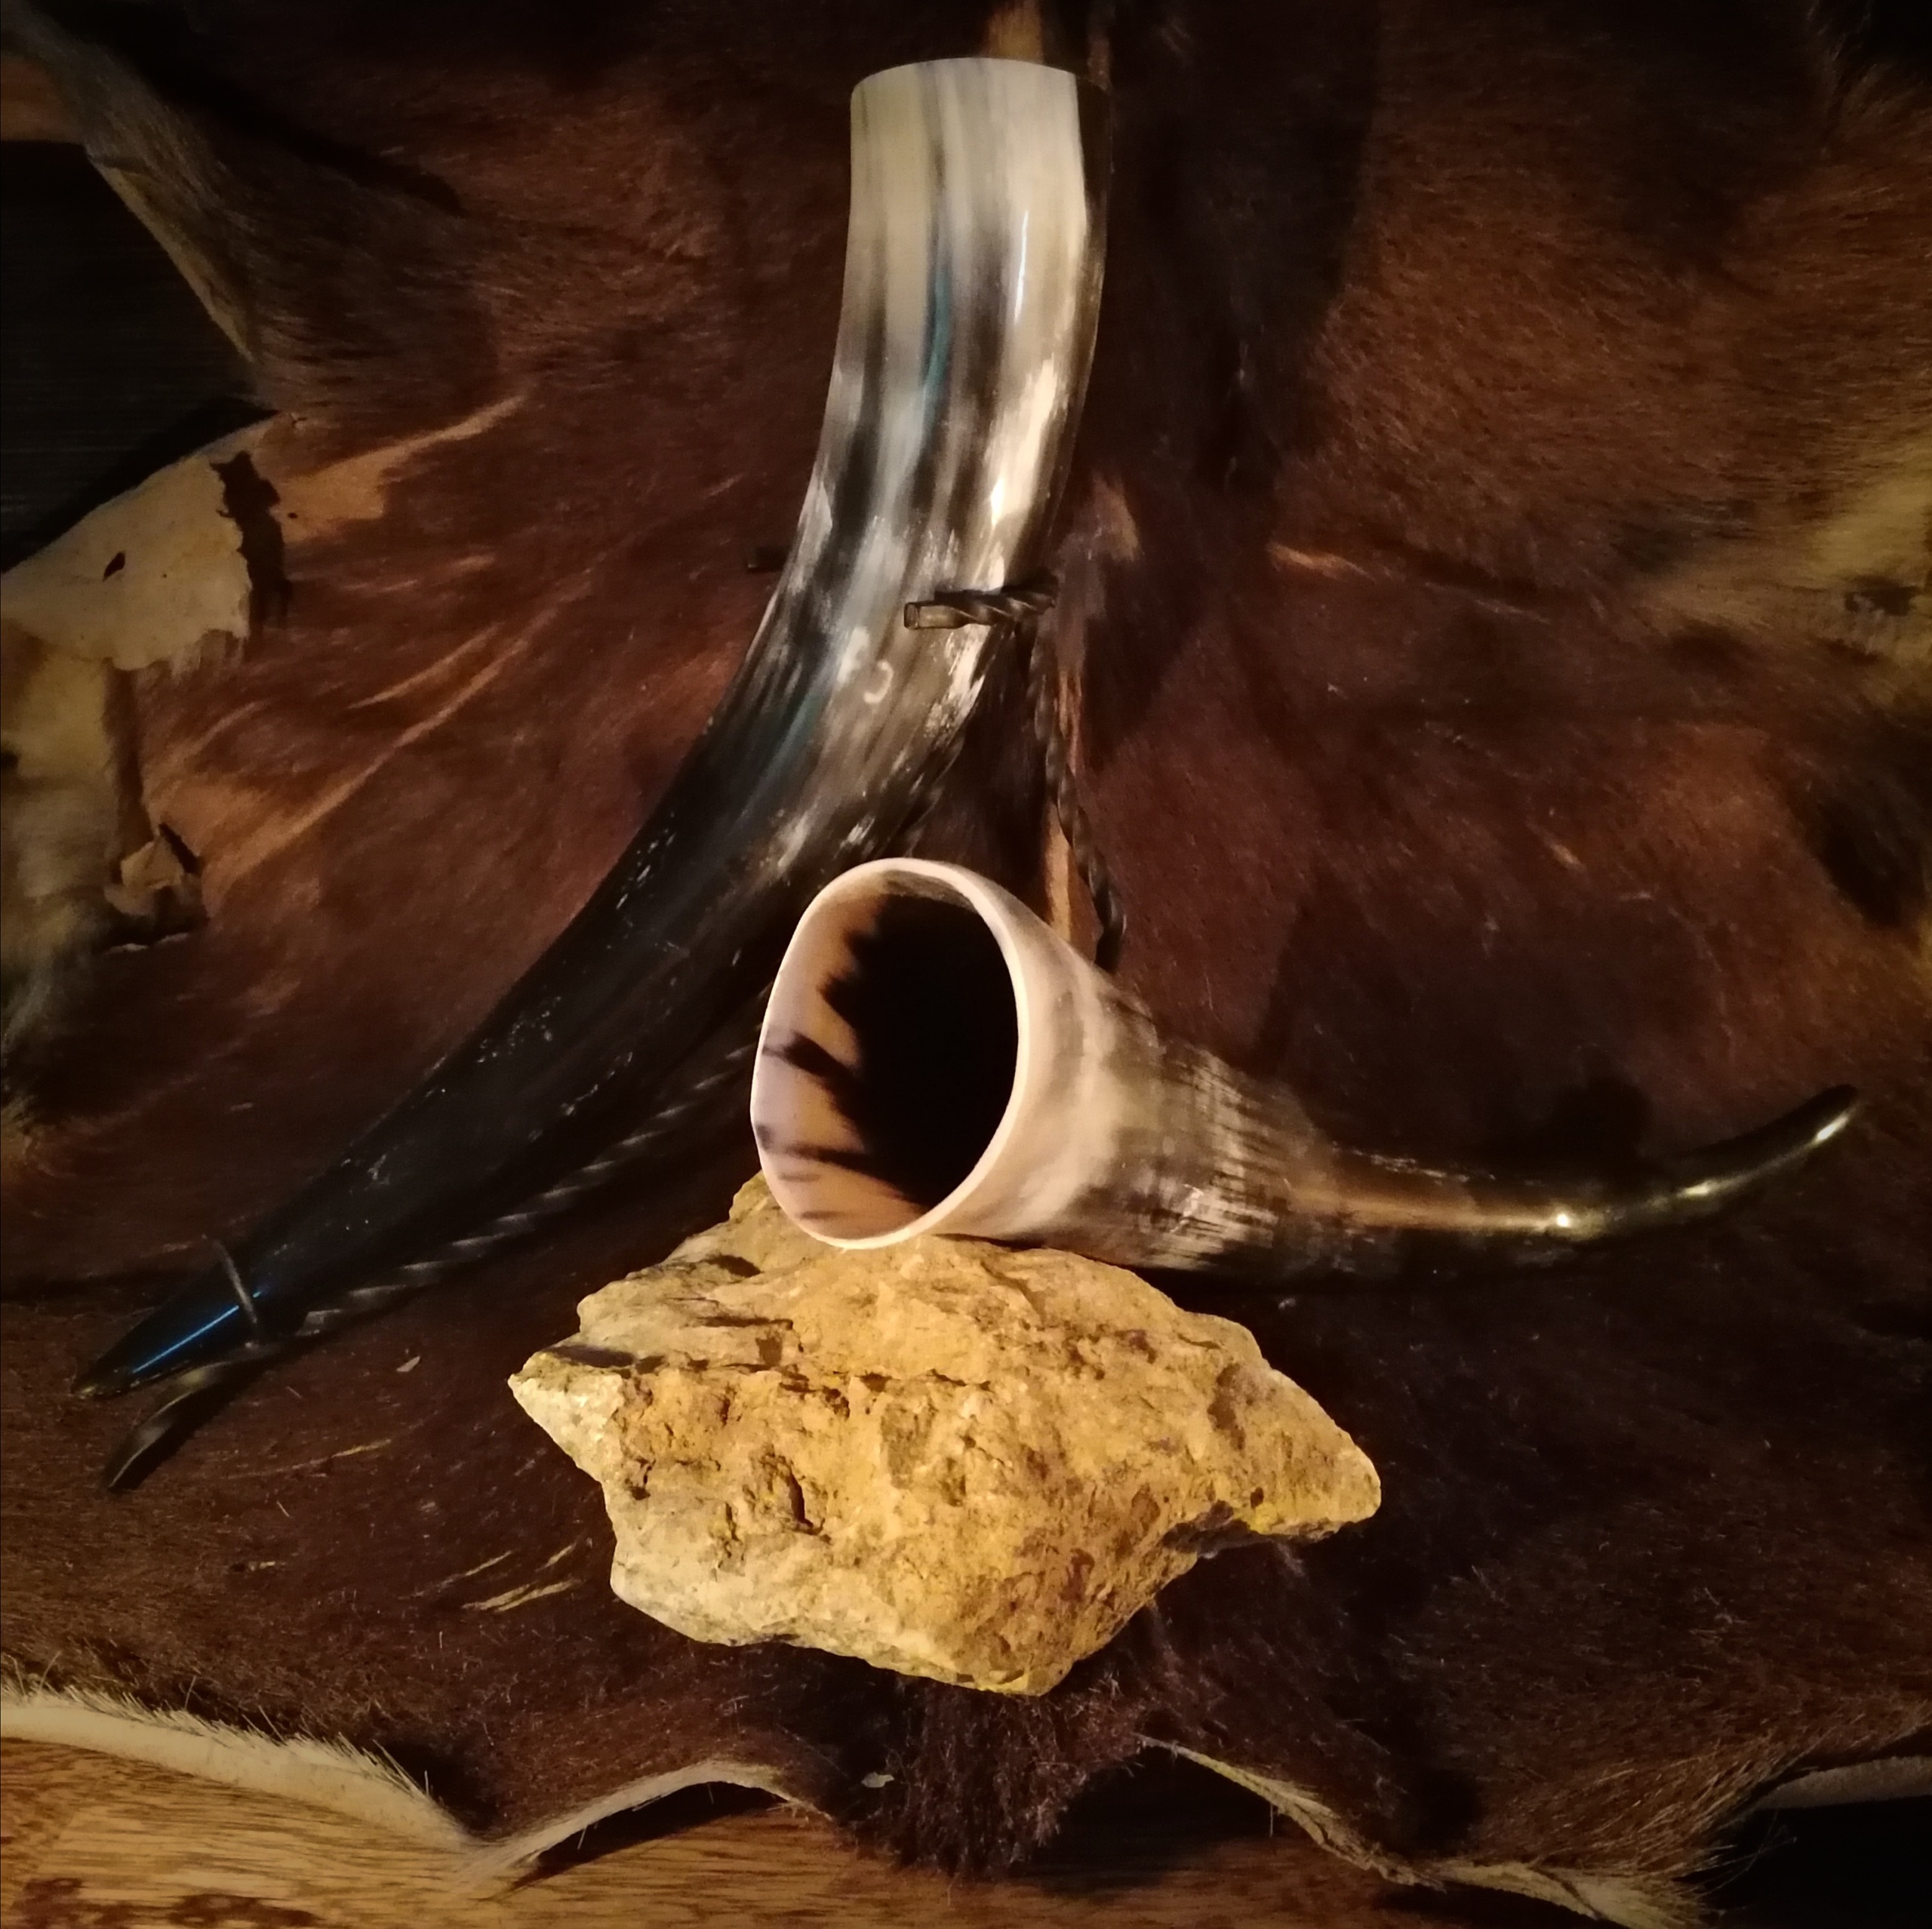 Cutlery, drinking horns and more